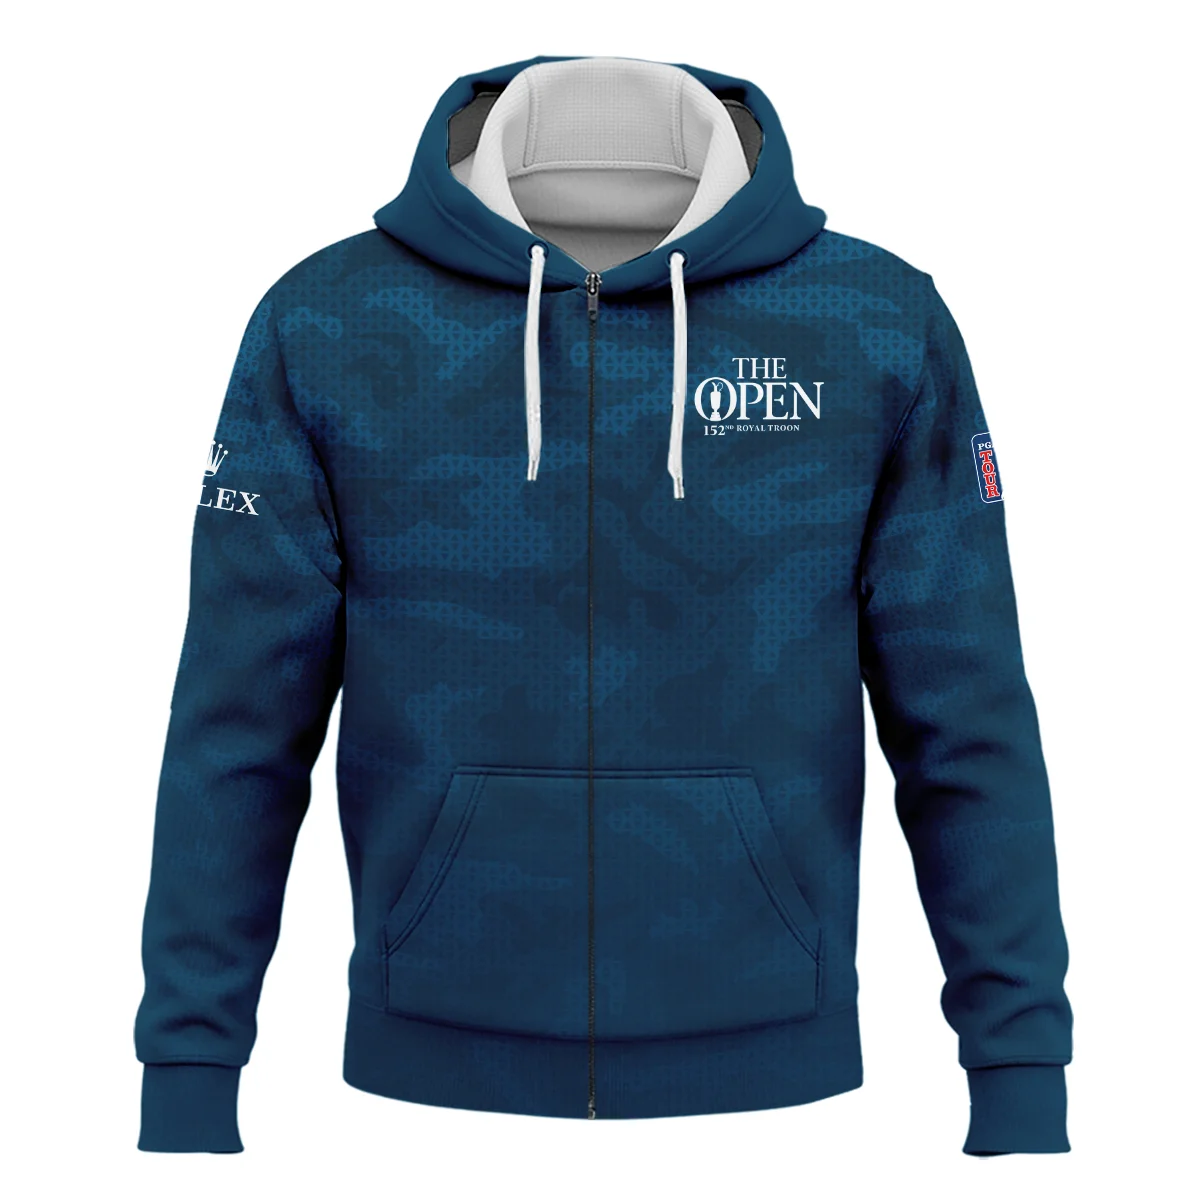 Rolex 152nd Open Championship Dark Blue Abstract Background Quarter-Zip Jacket All Over Prints HOTOP260624A02ROXSWZ